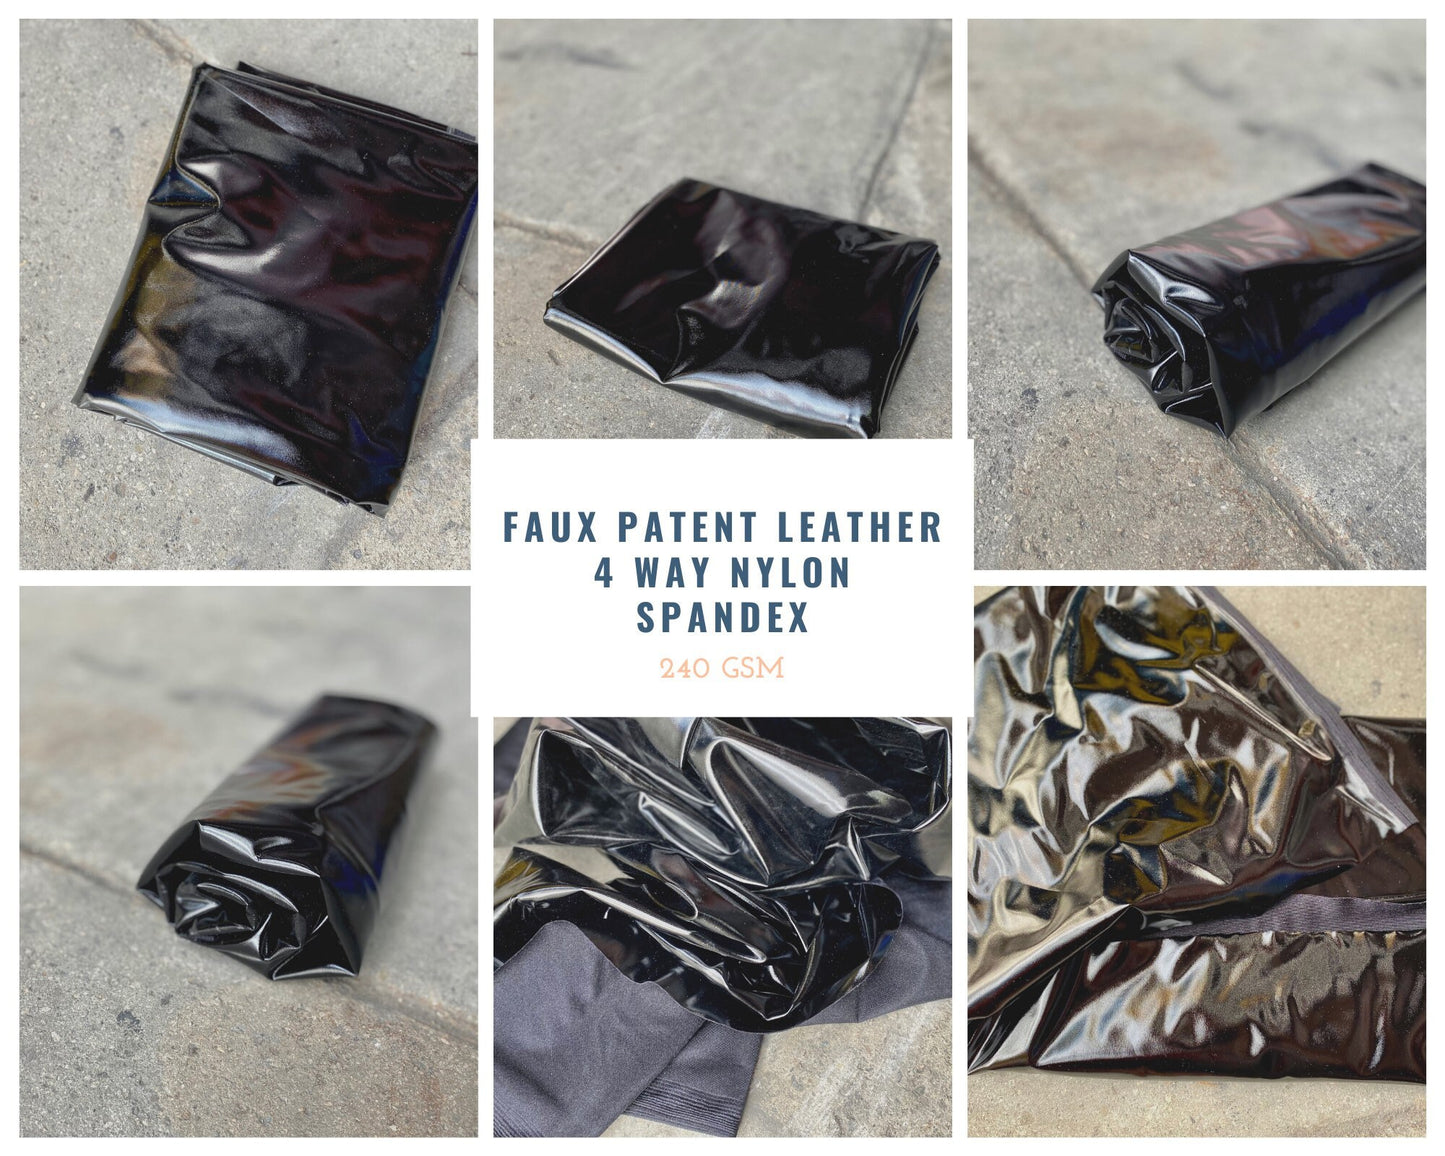 Faux Patent Leather 4 Way Nylon Spandex Fabric By The Yard  240 GSM